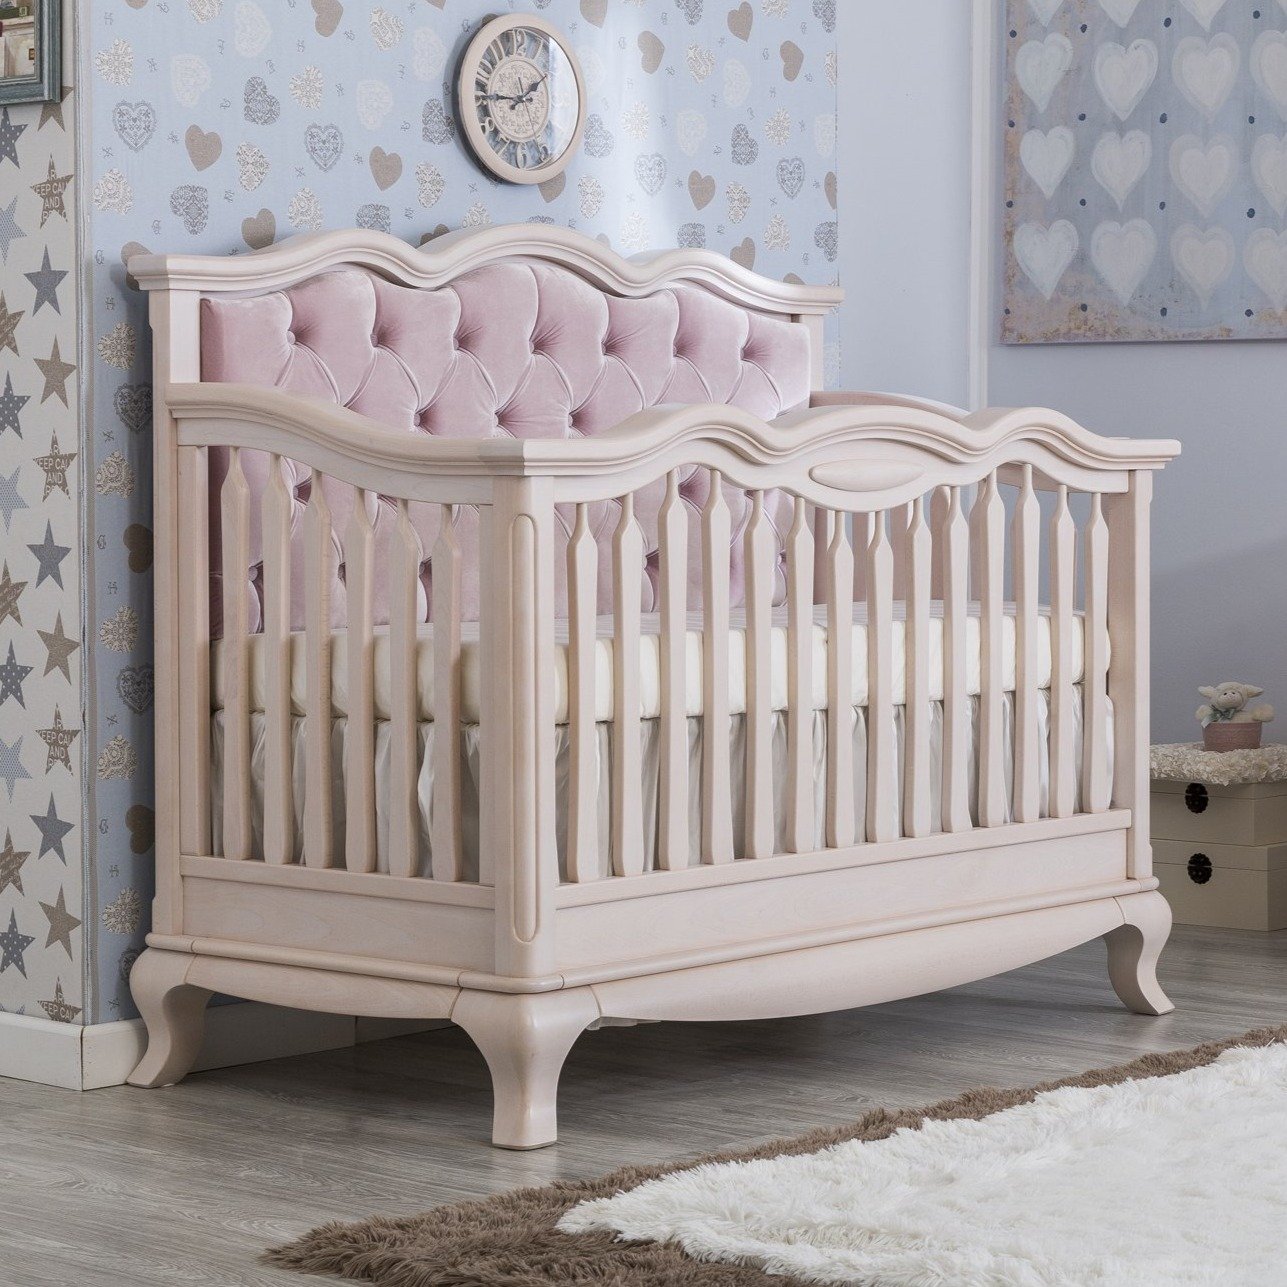 Romina Cleopatra Convertible Crib With Tufted Panel